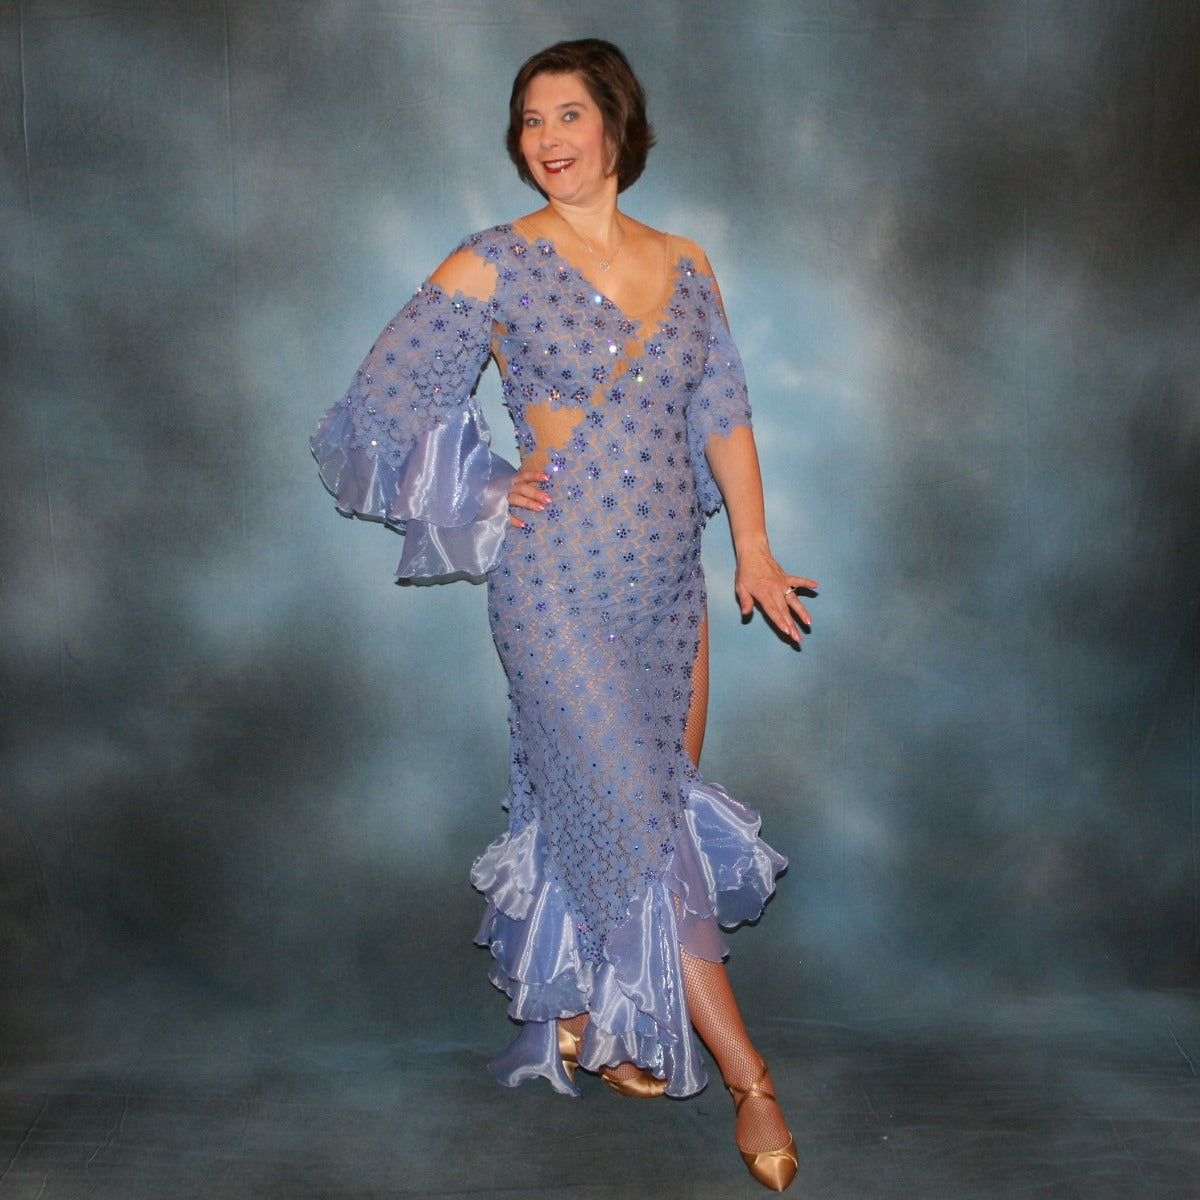 Crystal's Creations side view of Lavender Latin/rhythm dress created in periwinkle stretch lace on nude illusion base, with hand cut details, flounces of periwinkle organza, embellished with Swarovski rhinestone work of tanzanite, CAB, & tanzanite ab.